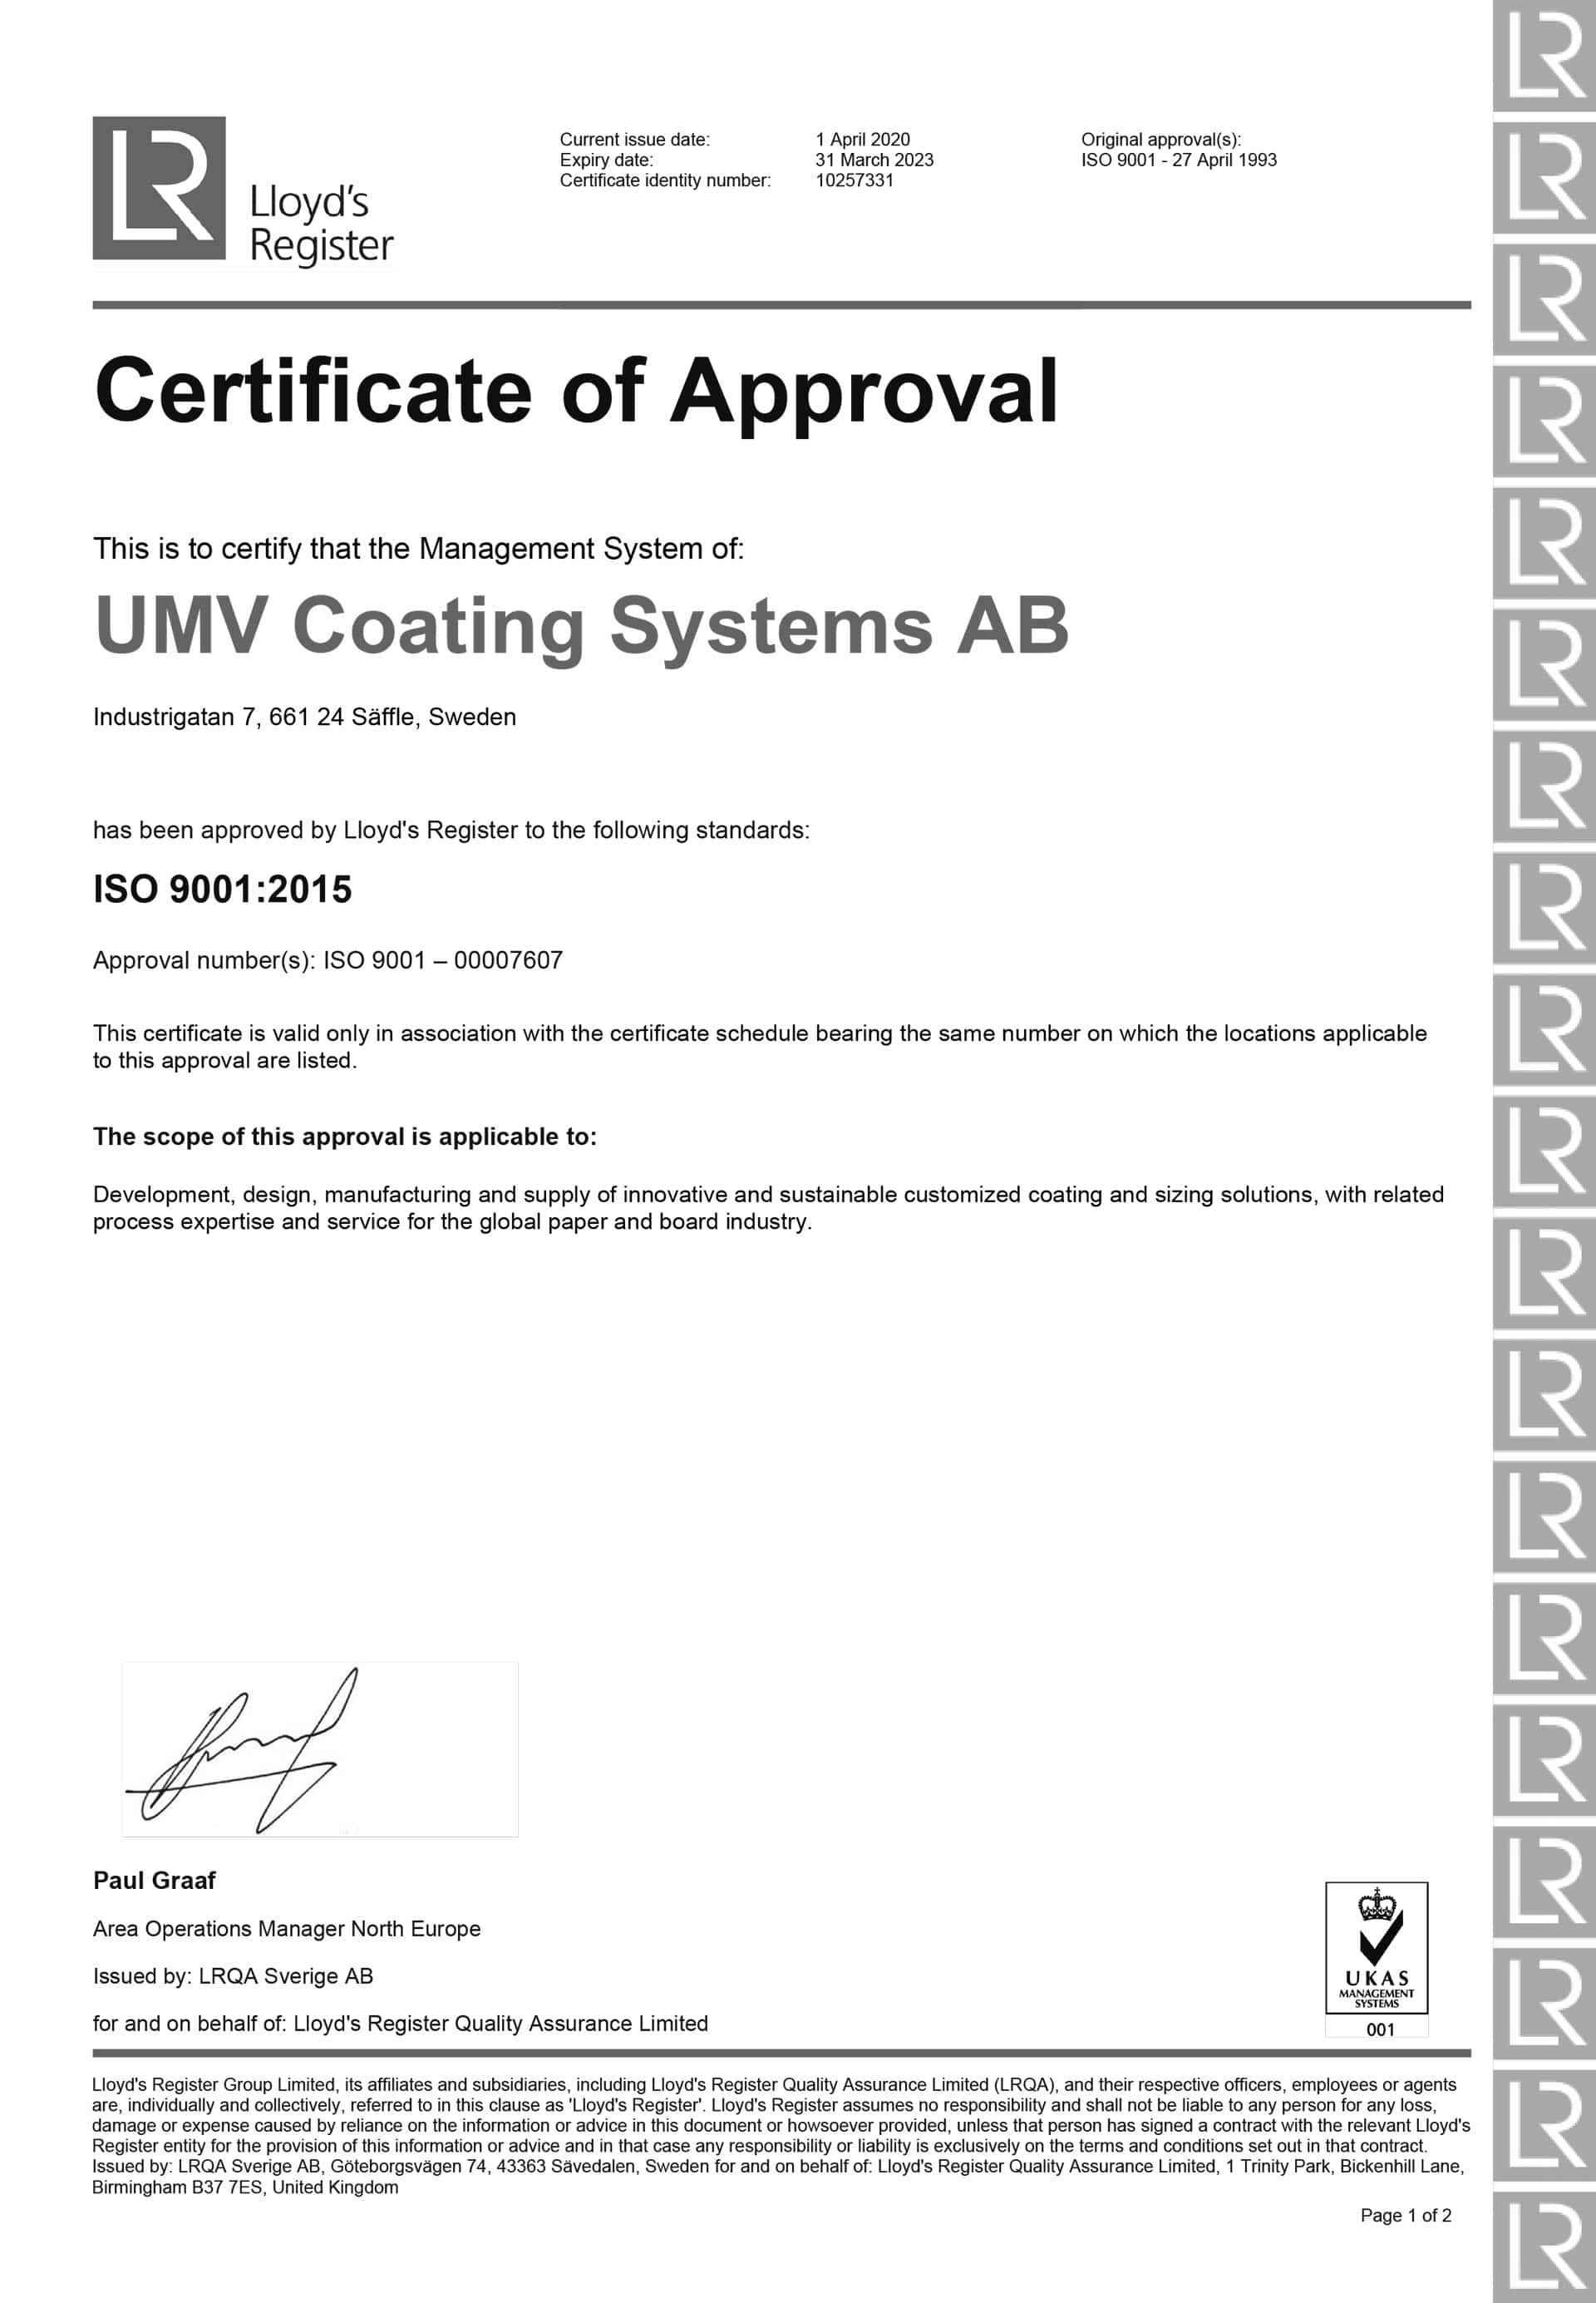 Certificate of Approval for ISO 9001:215 standard